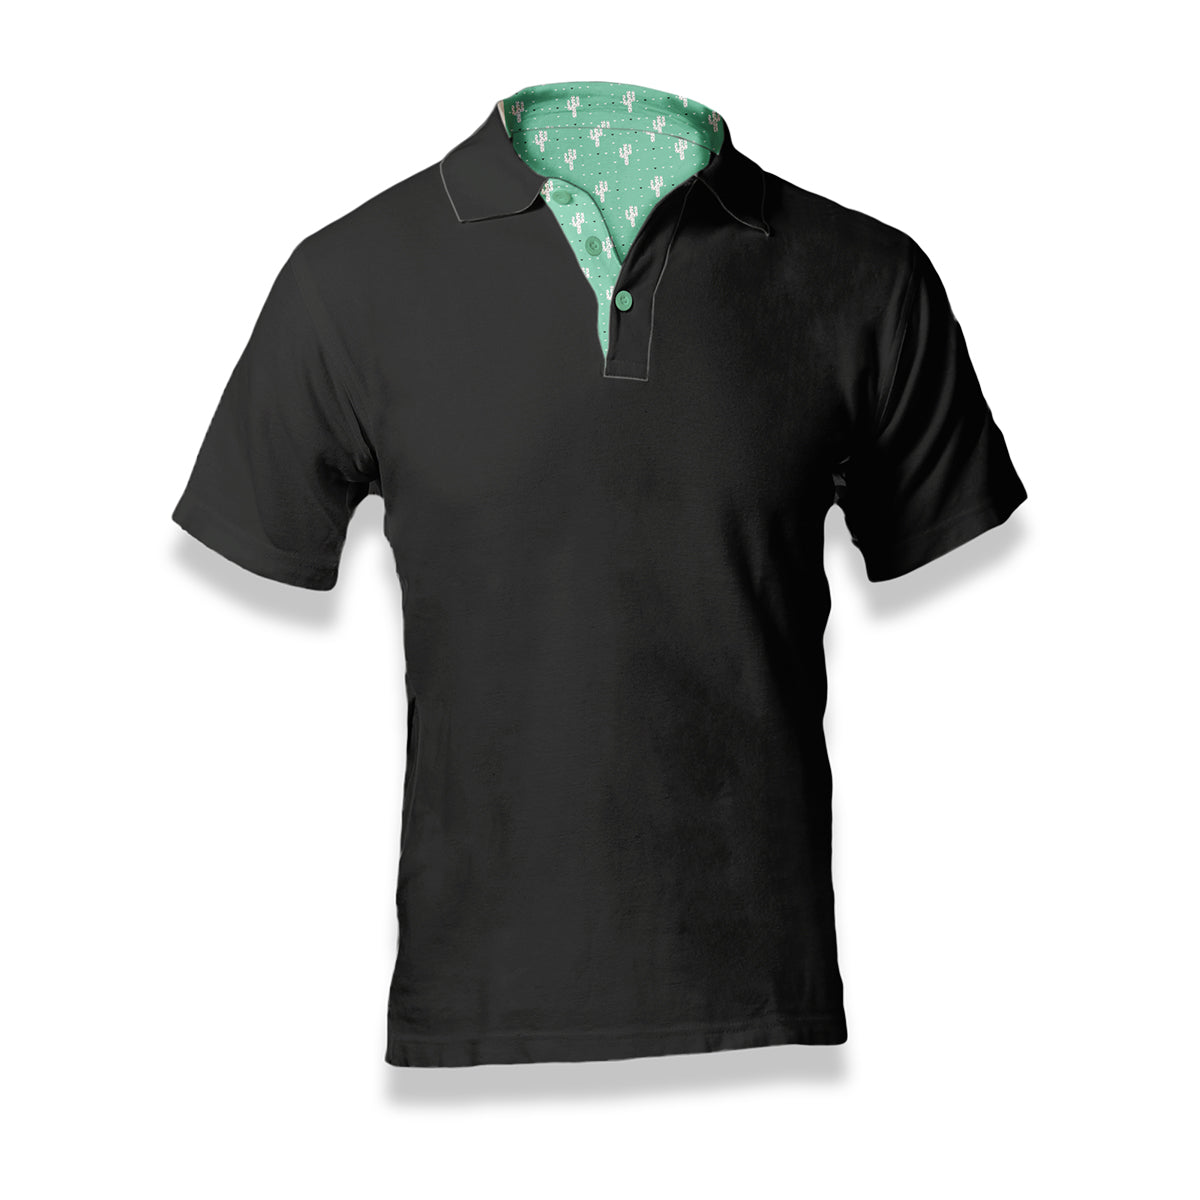 Men's Polo - Solid Mint Prick